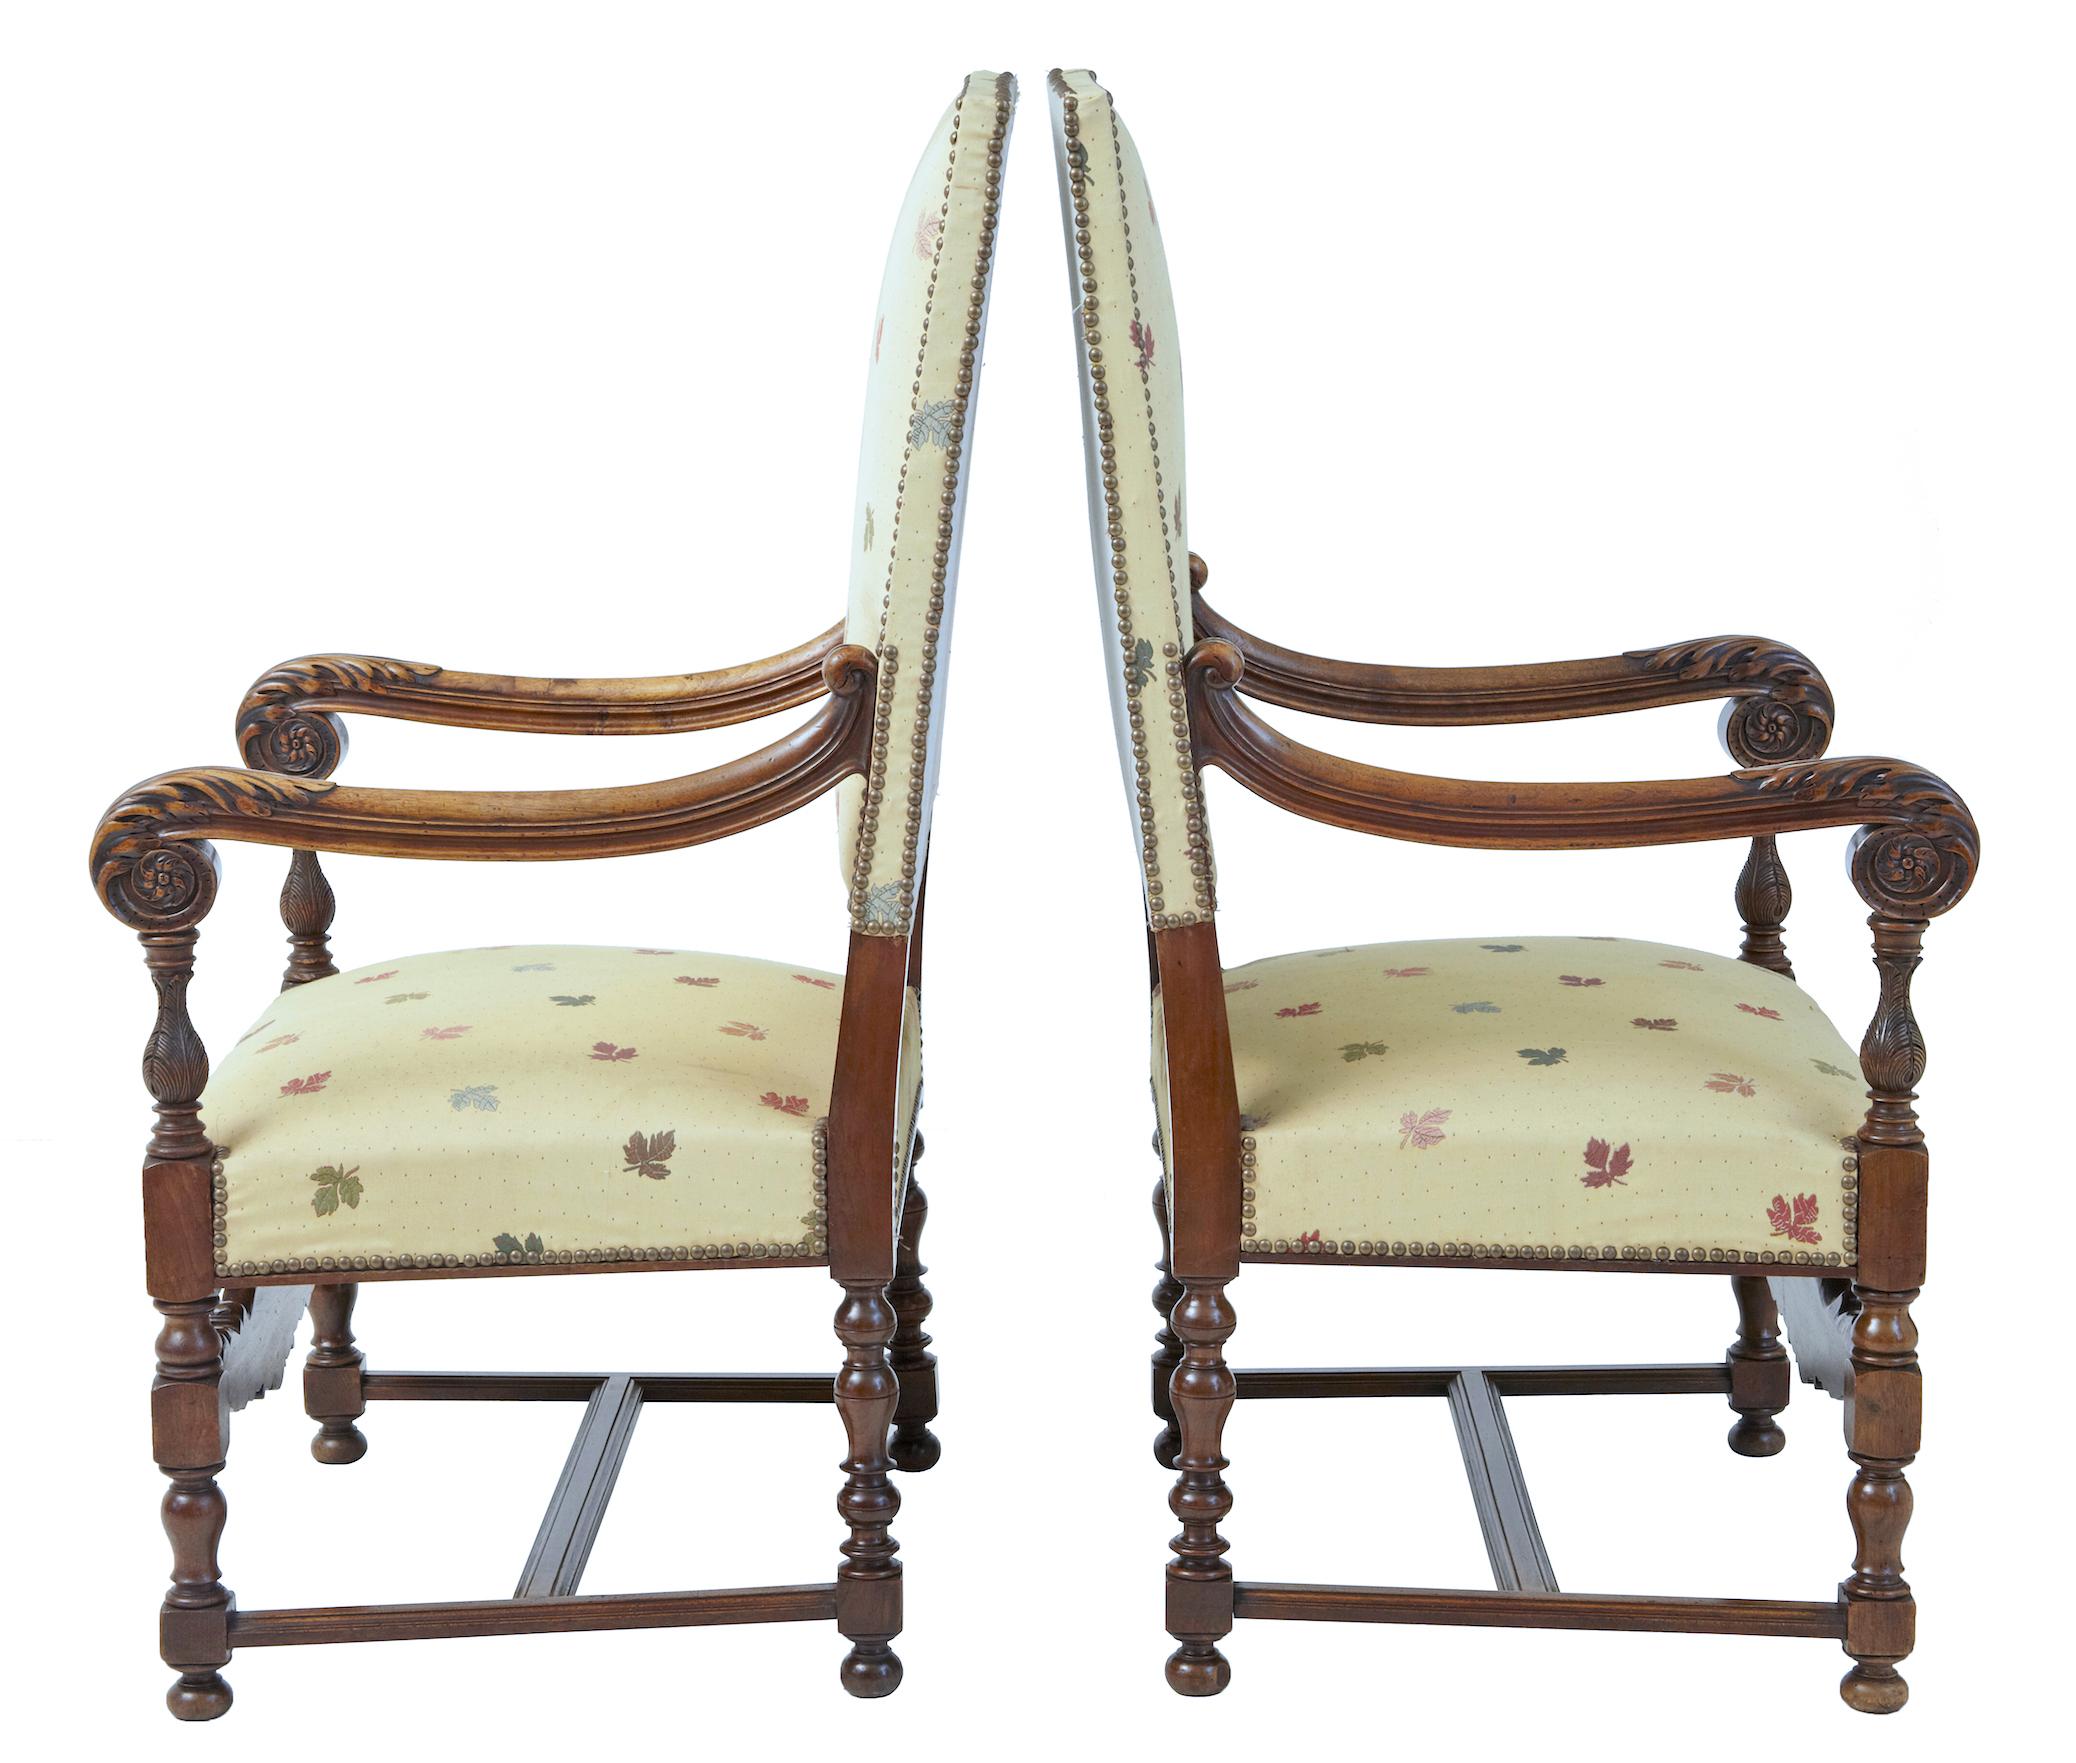 19th century French carved walnut large armchairs, circa 1880.

Elegant pair of 19th century armchairs which are generous in the seat dimensions. Beautifully carved scrolling arms with carved acanthus leaf and roundels. Carved detail in the lower